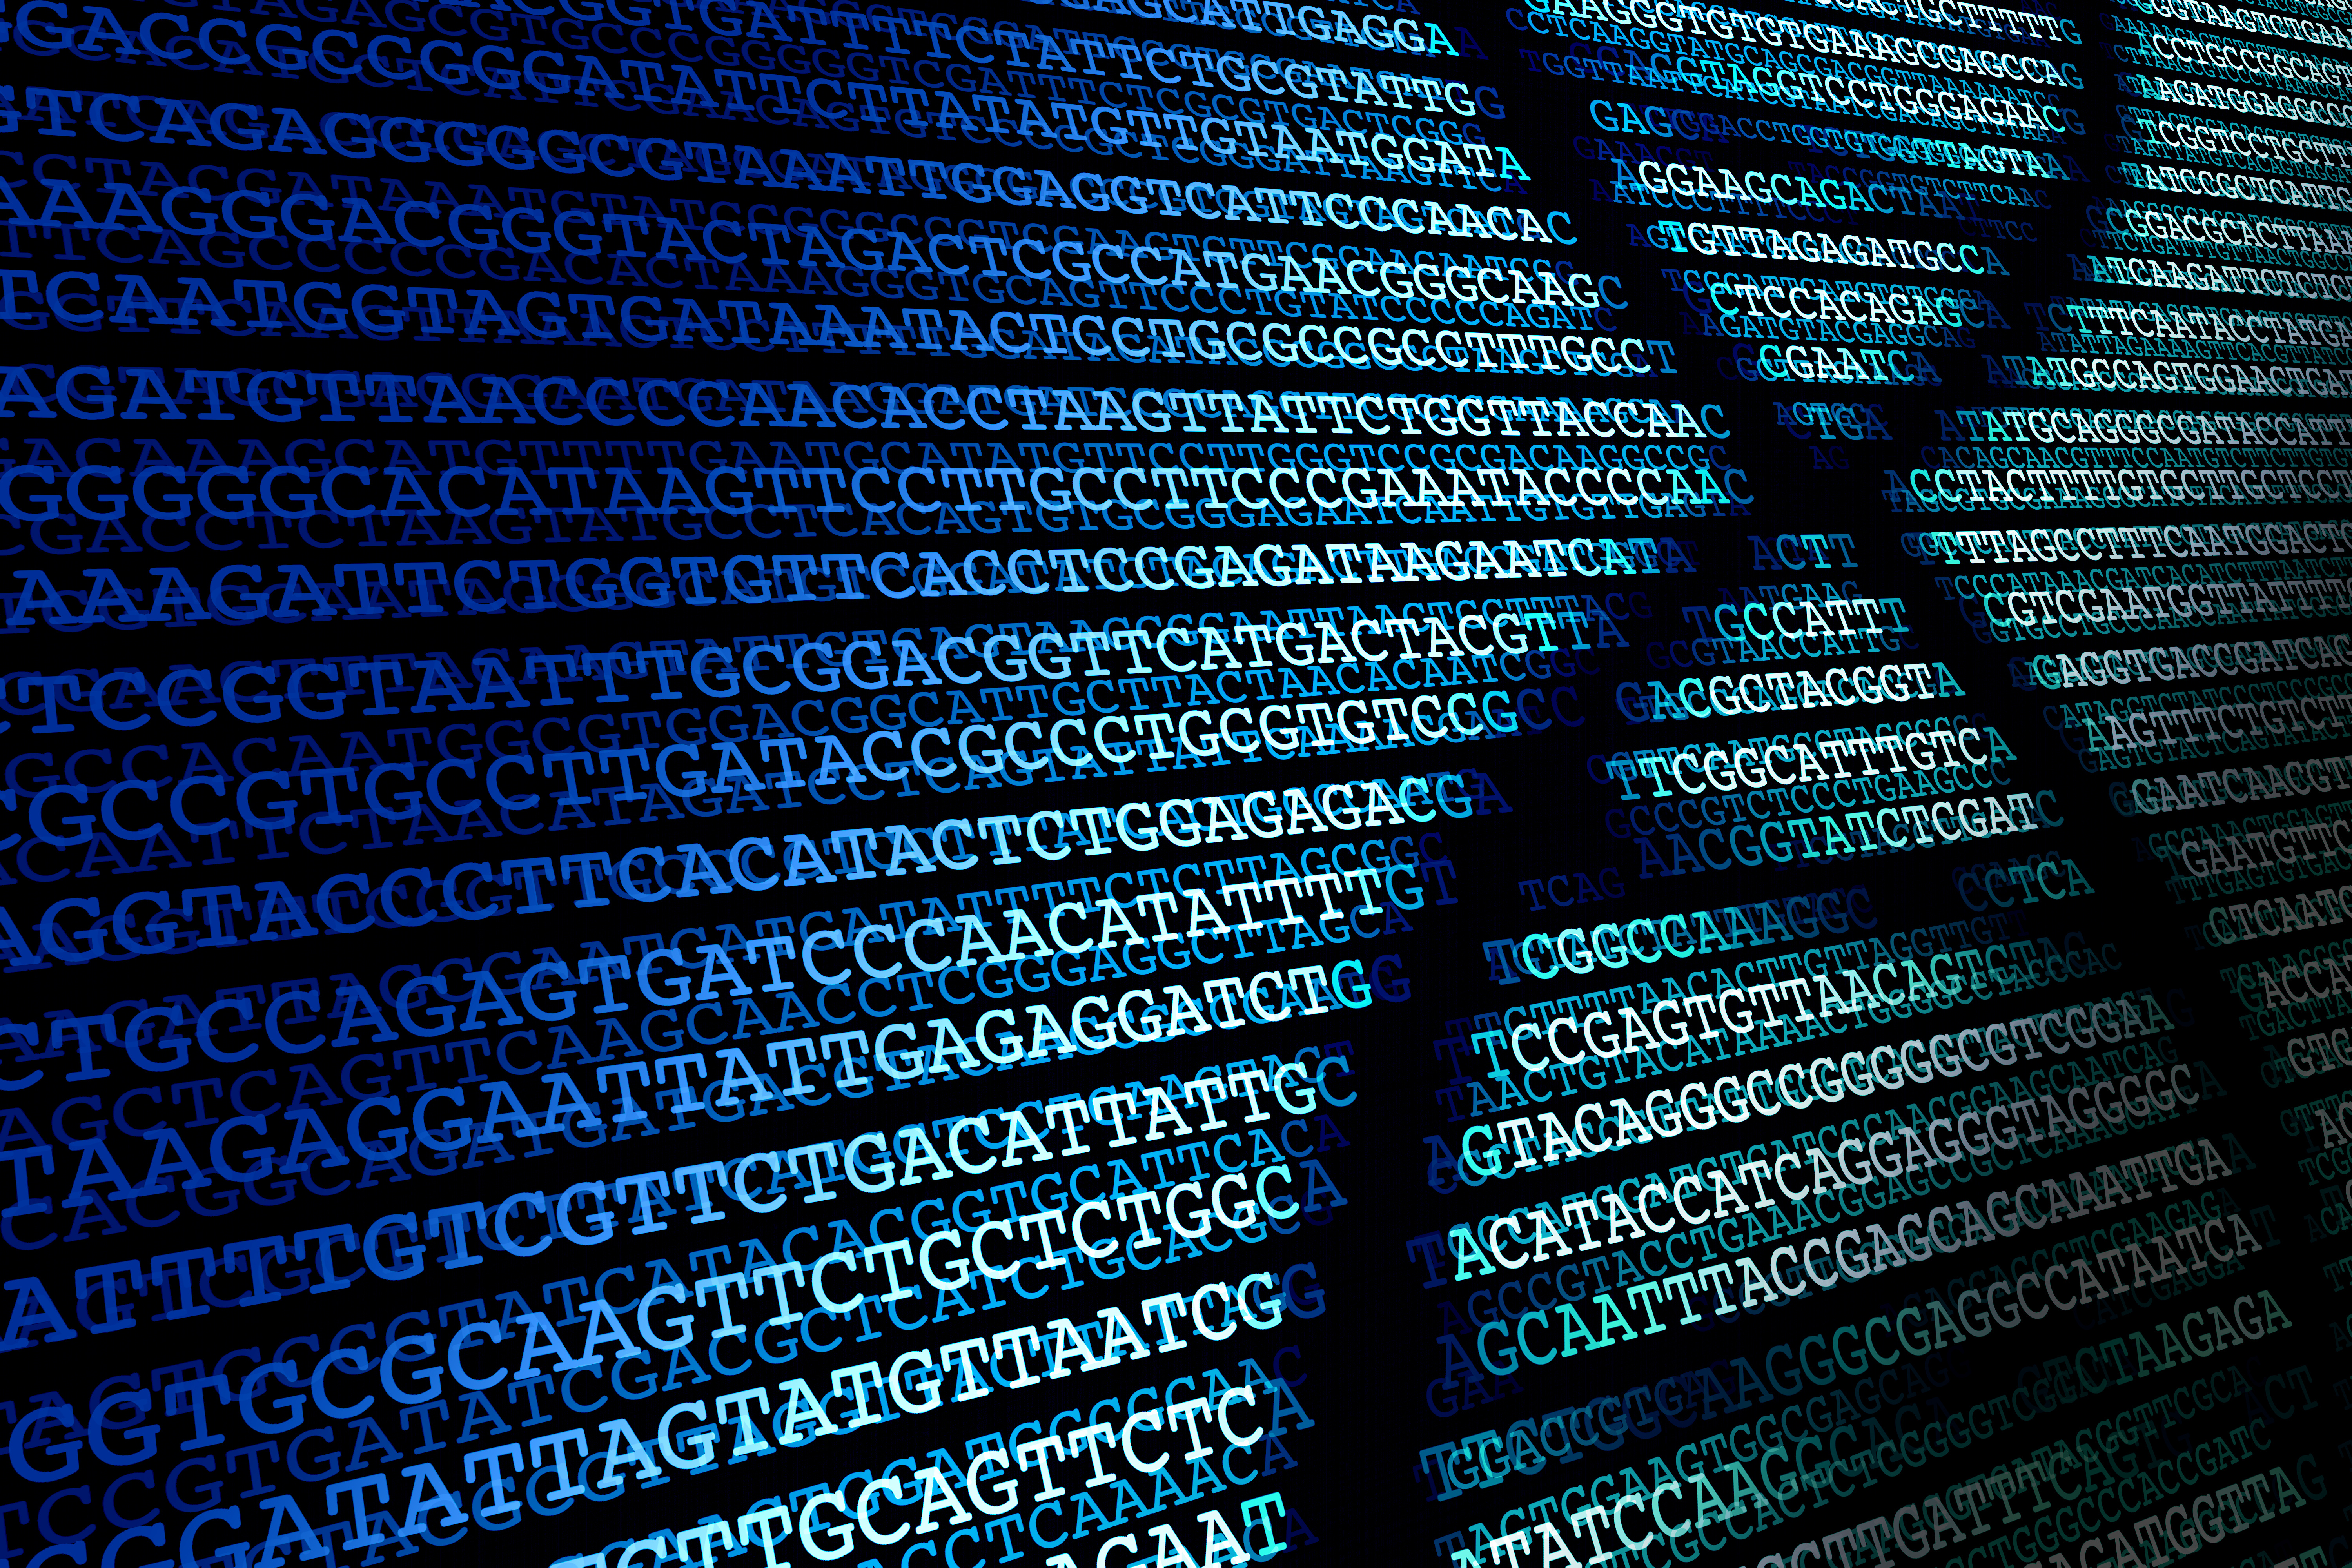 Revealing the genome's secrets: advances and applications of next-generation sequencing